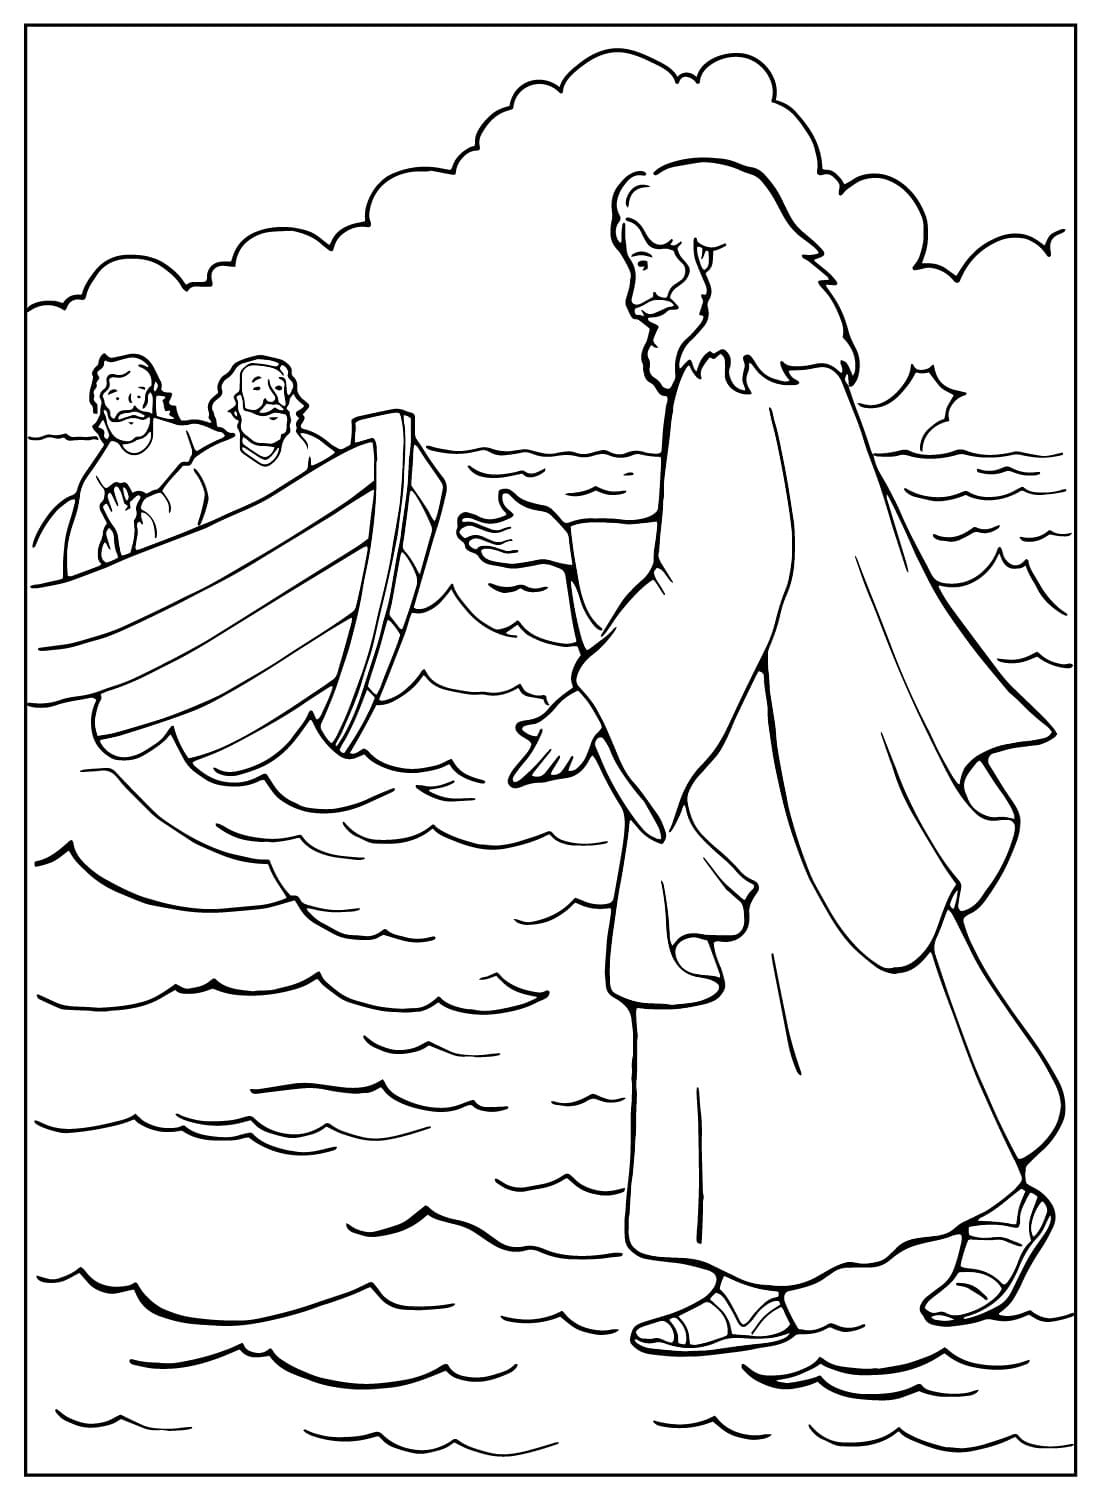 Jesus Walking on the Sea Coloring Page from Jesus